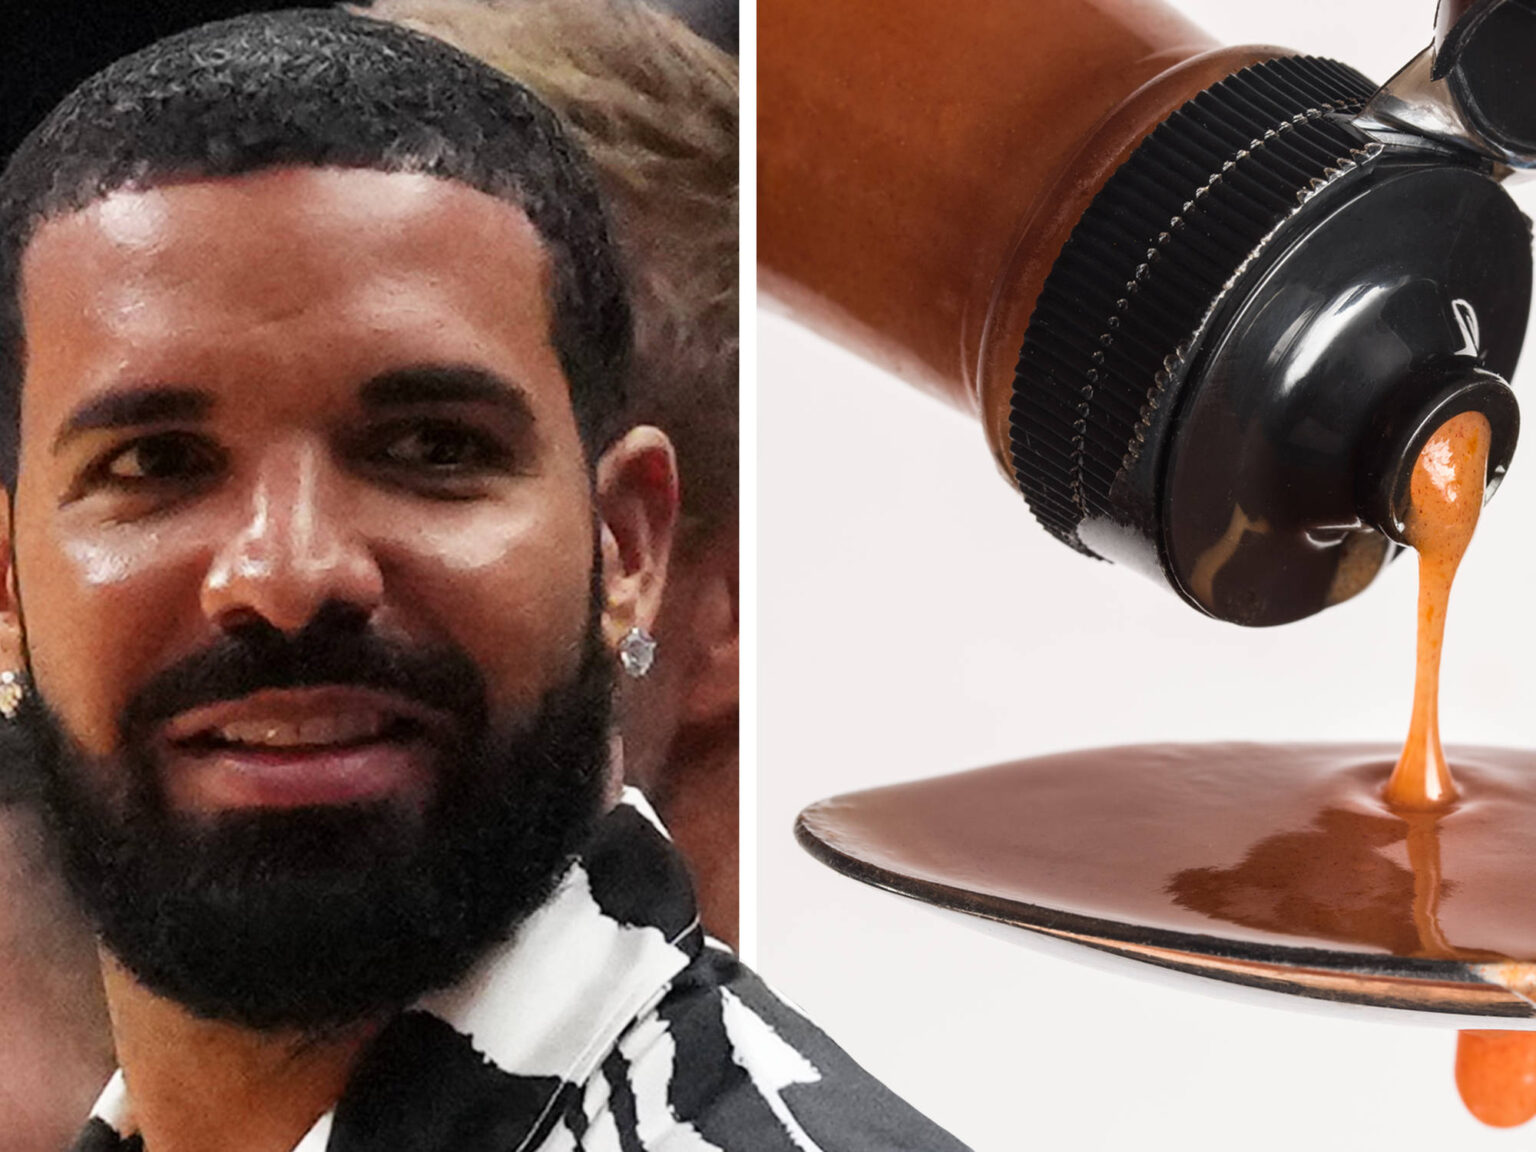 Who Is The Instagram Model Hot Sauce Model Accuses Drake Of Putting Hot Sauce In Condom Dandi